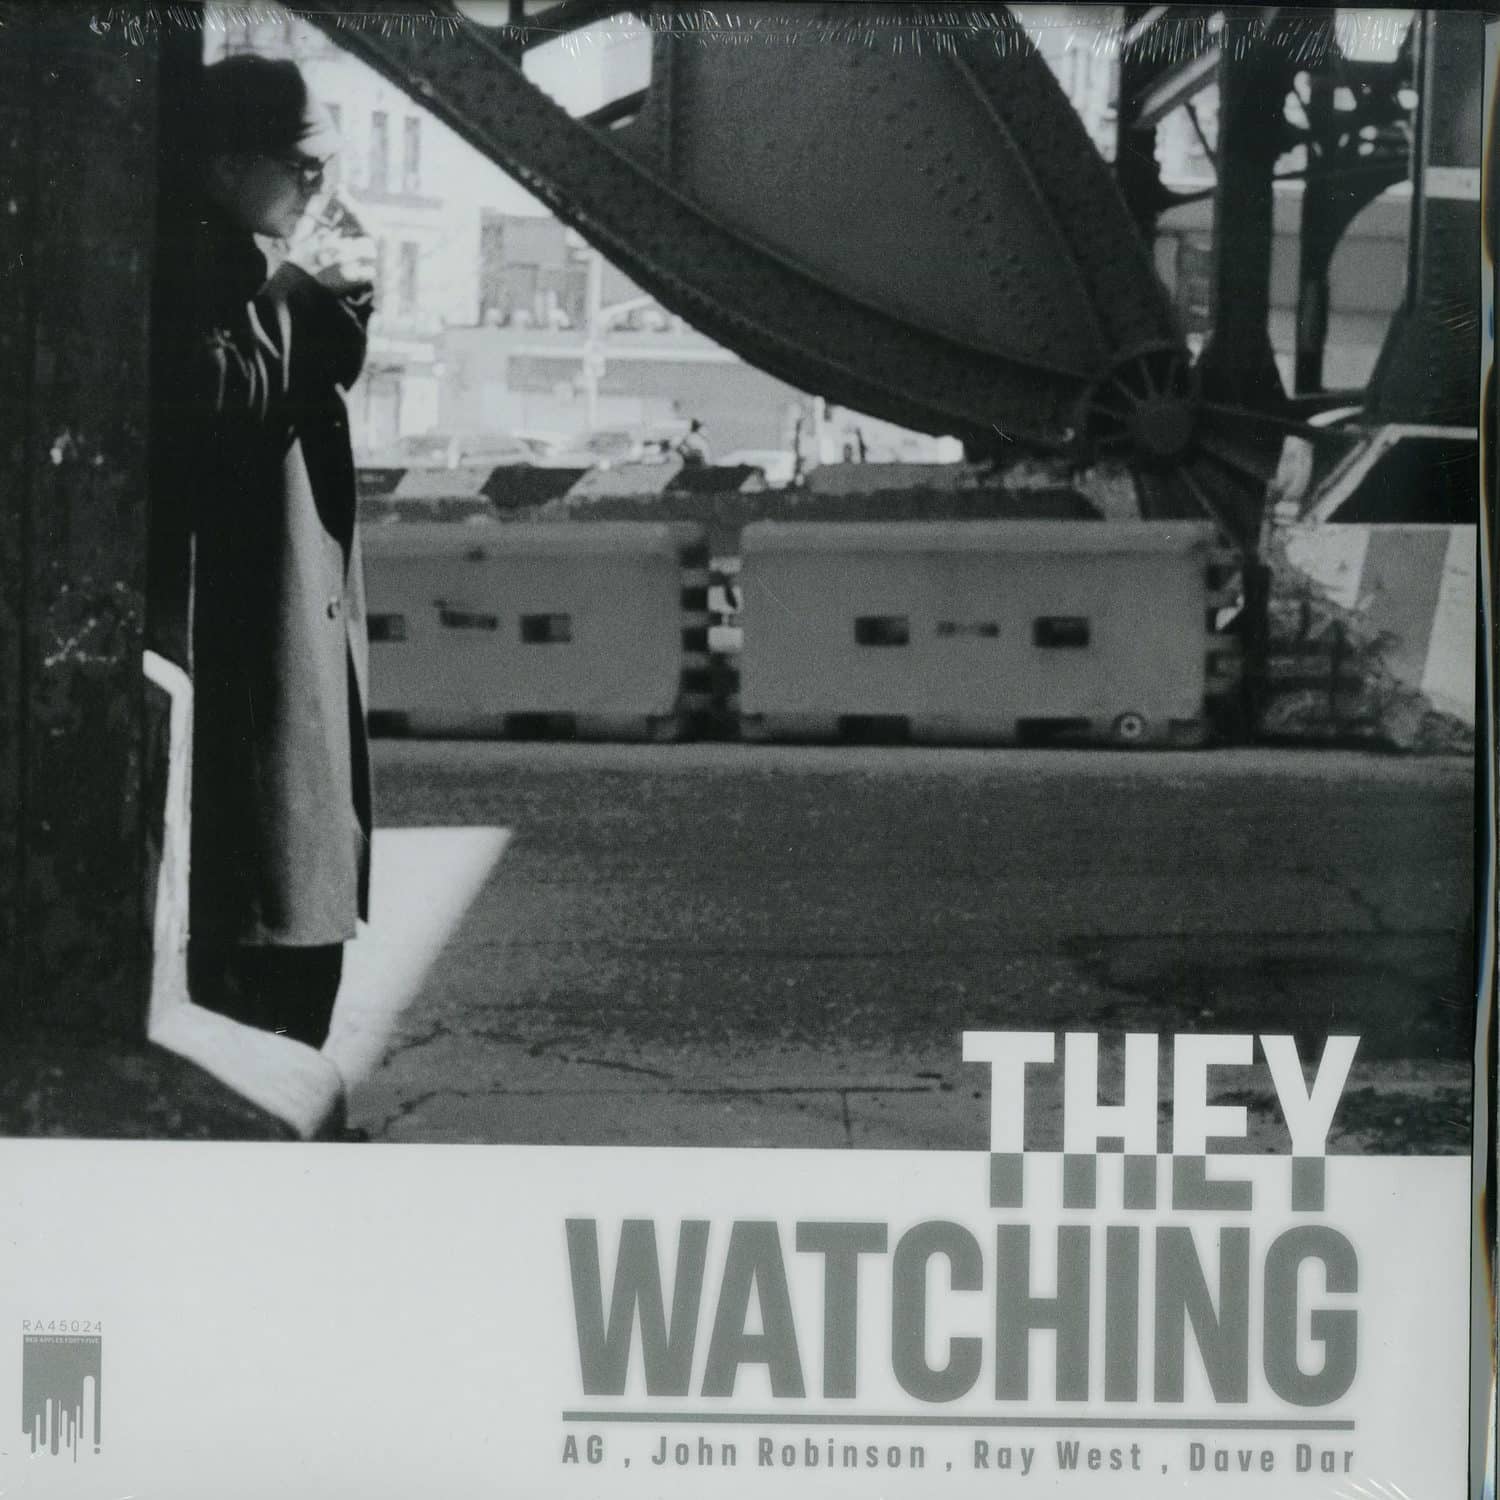 John Robinson & A.G. - THEY WATCHING EP 